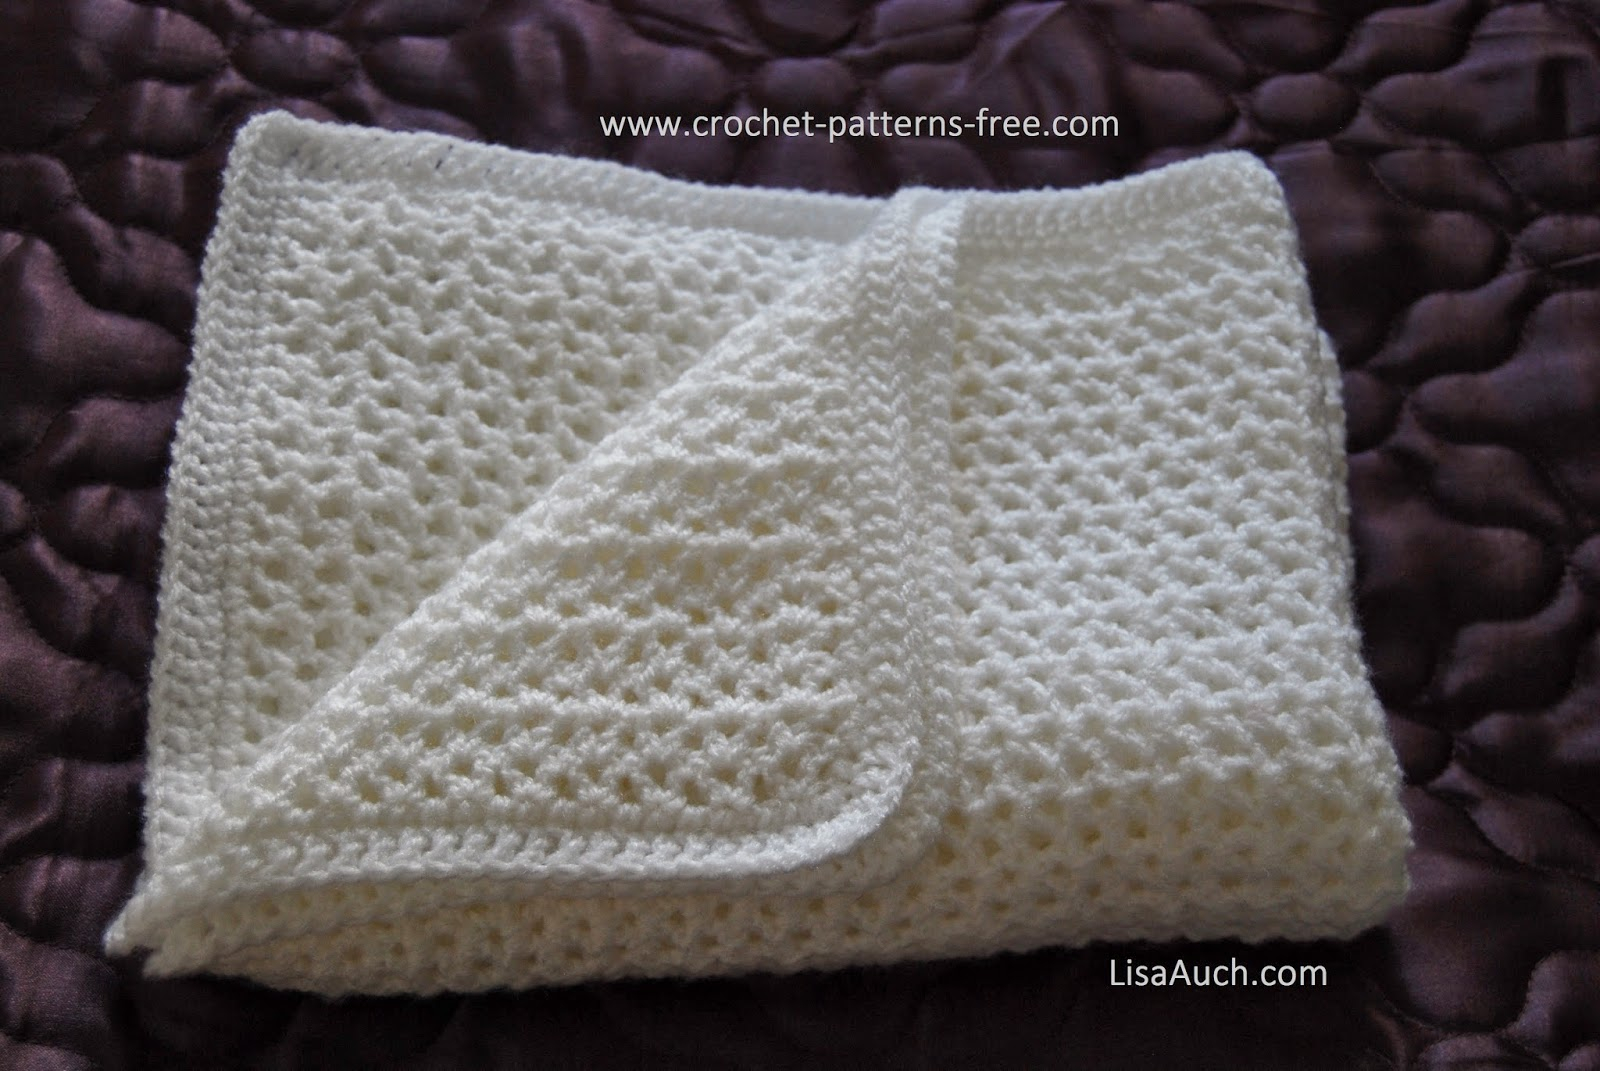 Crochet Patterns Baby Blankets Free Crochet Patterns And Designs Lisaauch Free Crochet Ba